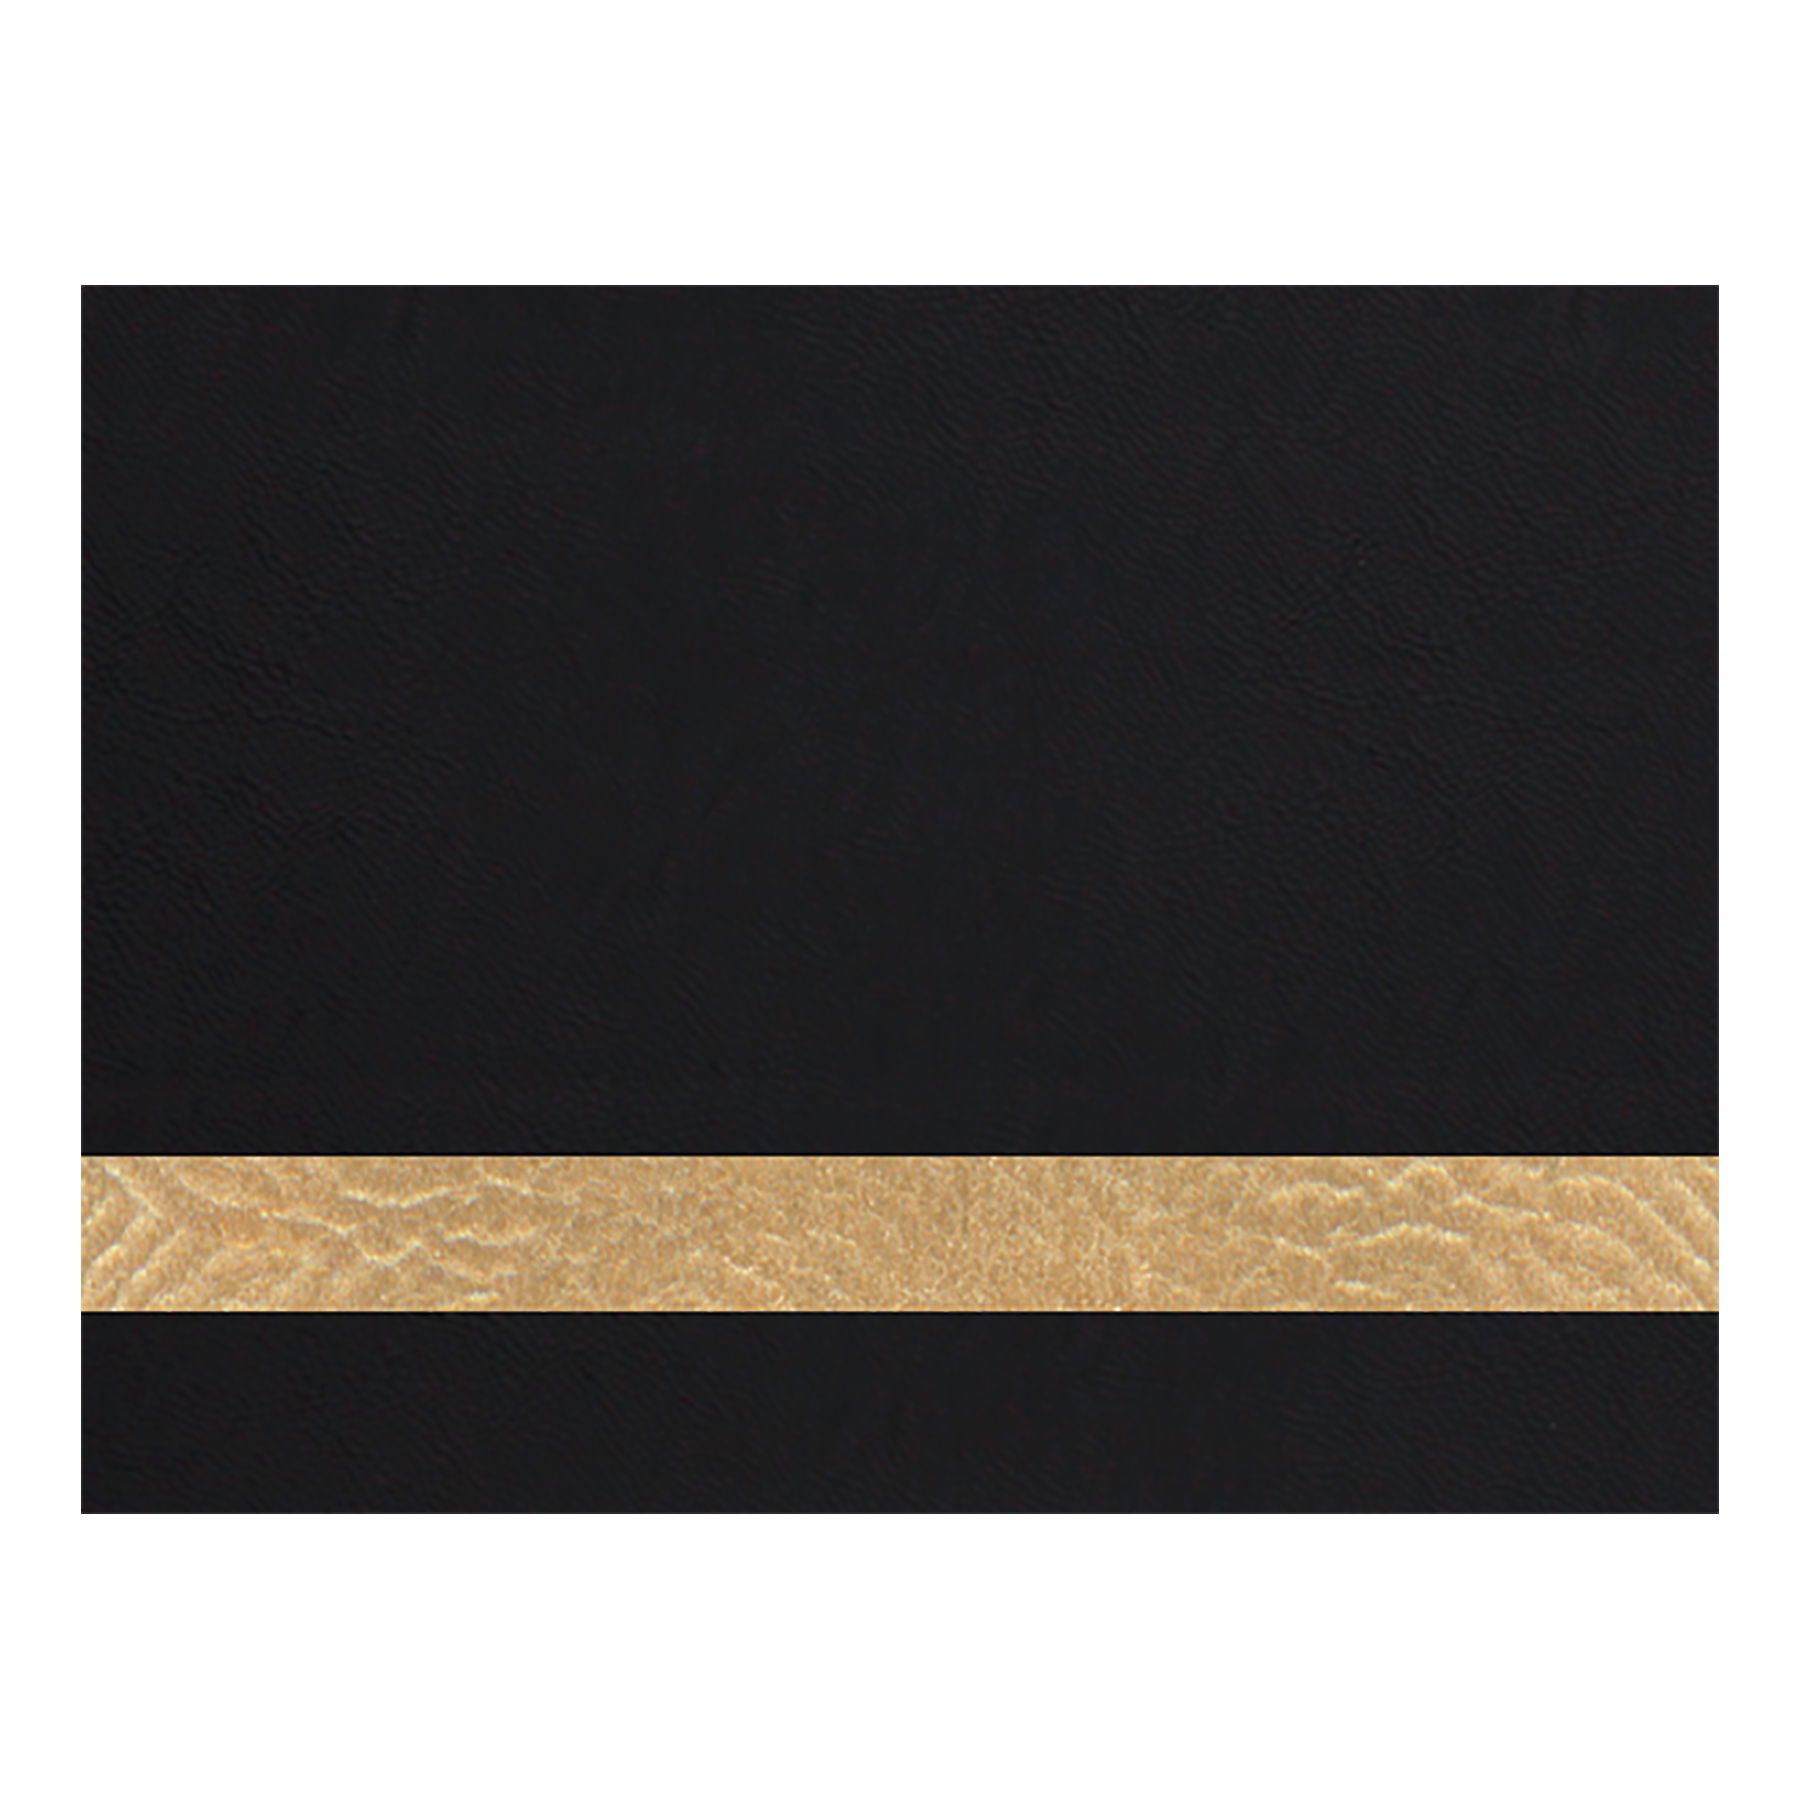 PRE-ORDER! Full Size Laserable Leatherette Sheet Stock, Epilog Fusion Edge Laser Engravers (Available Jan. 2022) Engraving Supplies Craftworks NW Fusion Edge 24 (24" x 24") Black/Gold 